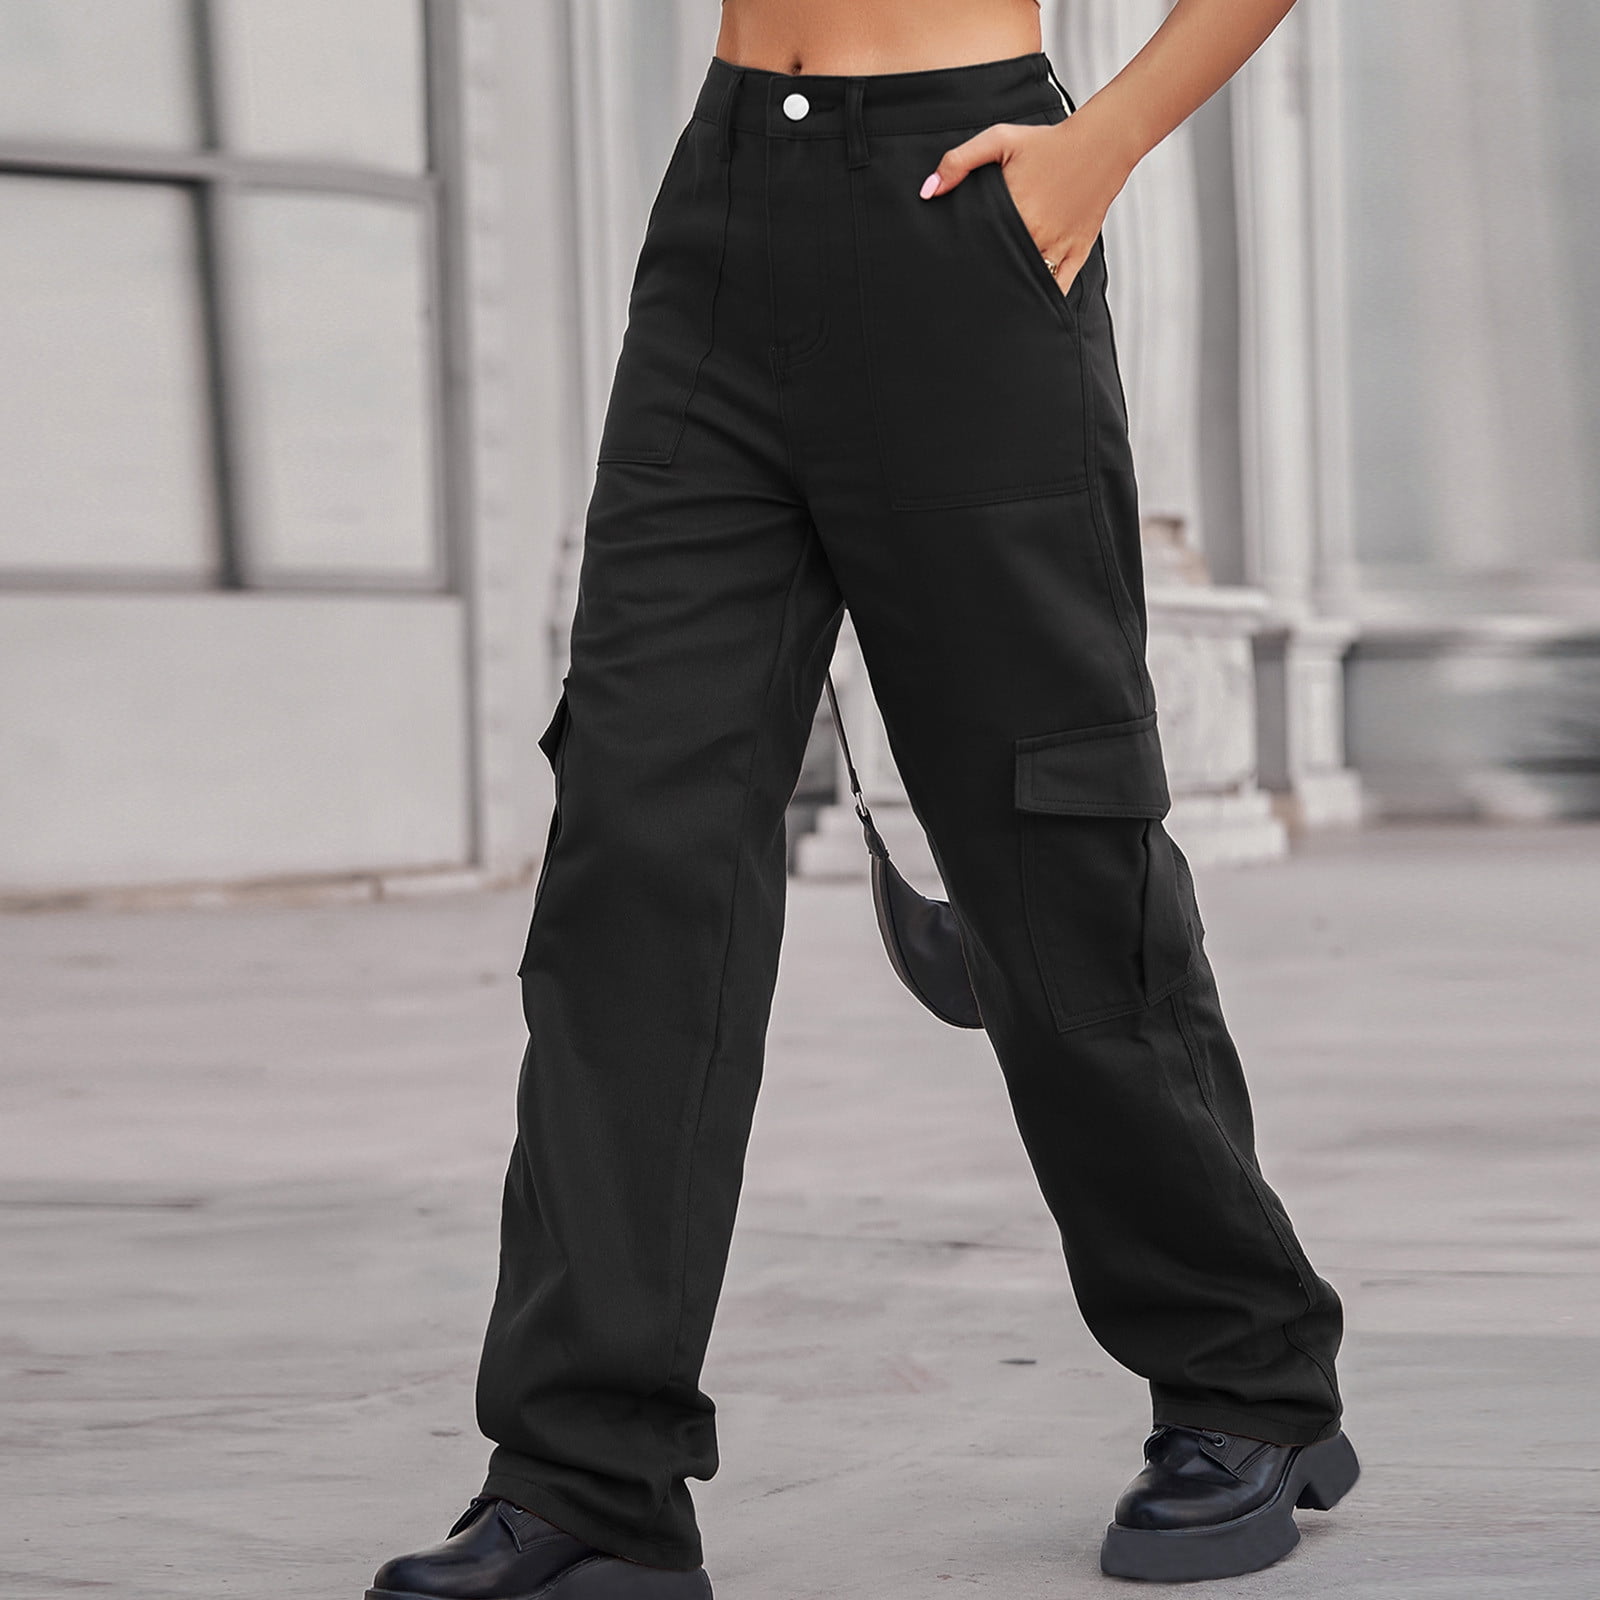 Womens Low Waisted Denim Workwear Cargo Pants For Women For Street And Hip  Hop Style, Perfect For Casual Wear And Vacation From Fllourishing, $26.41